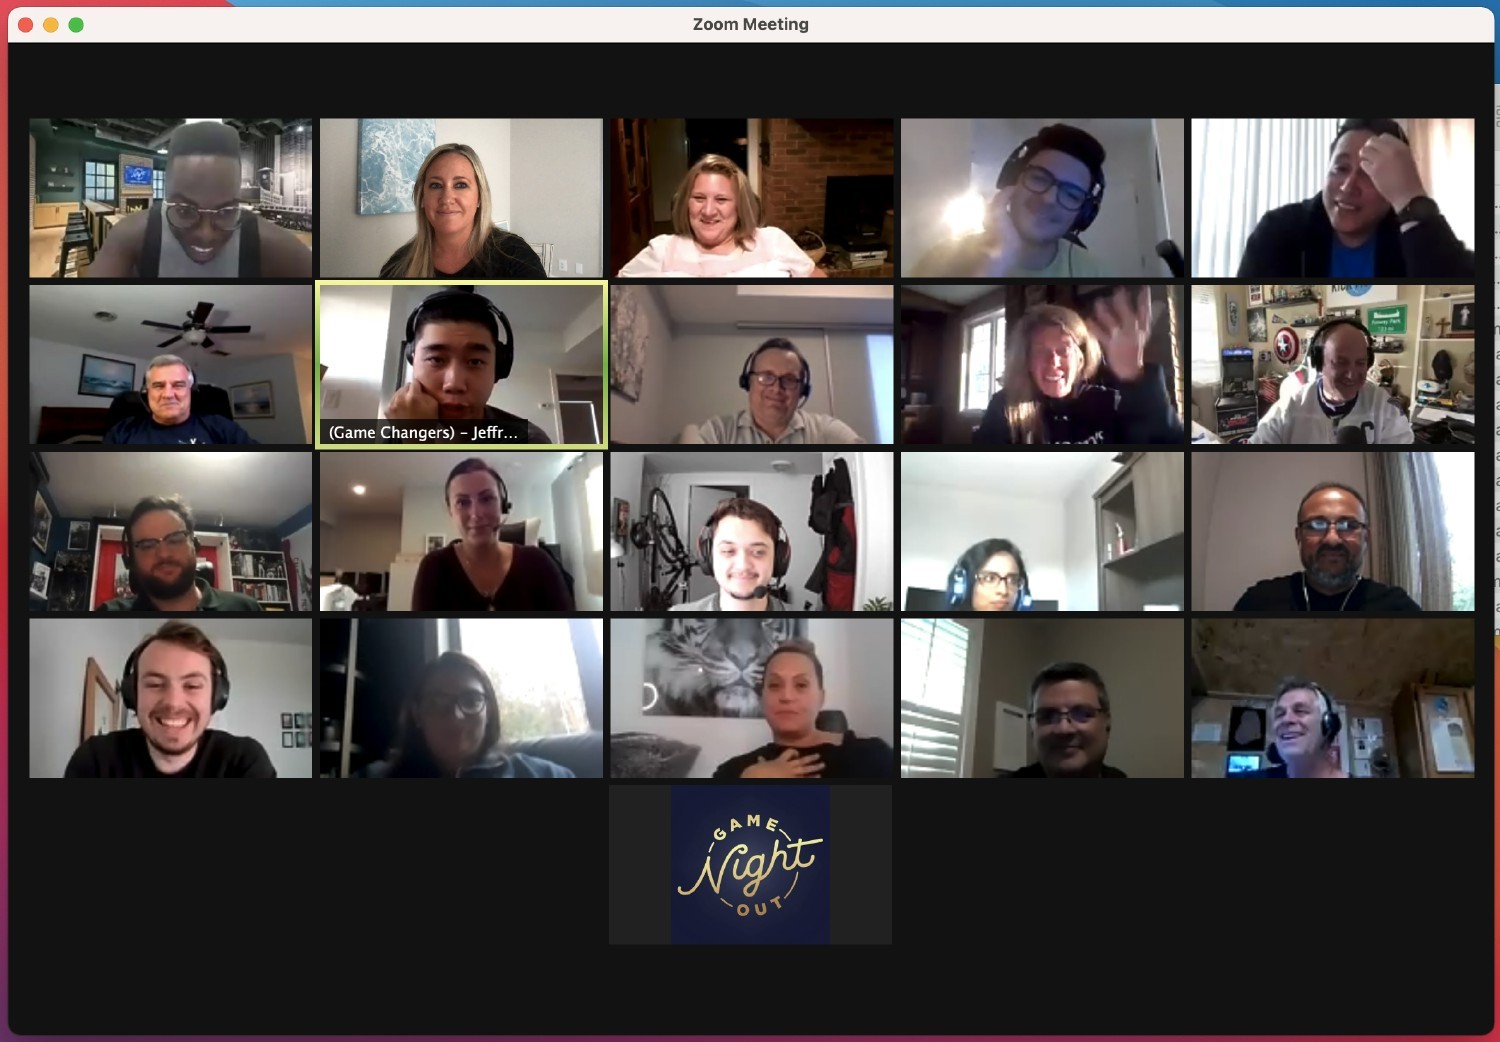 Our virtual meetups prove that distance can't keep us from having fun and building strong connections in a digital world